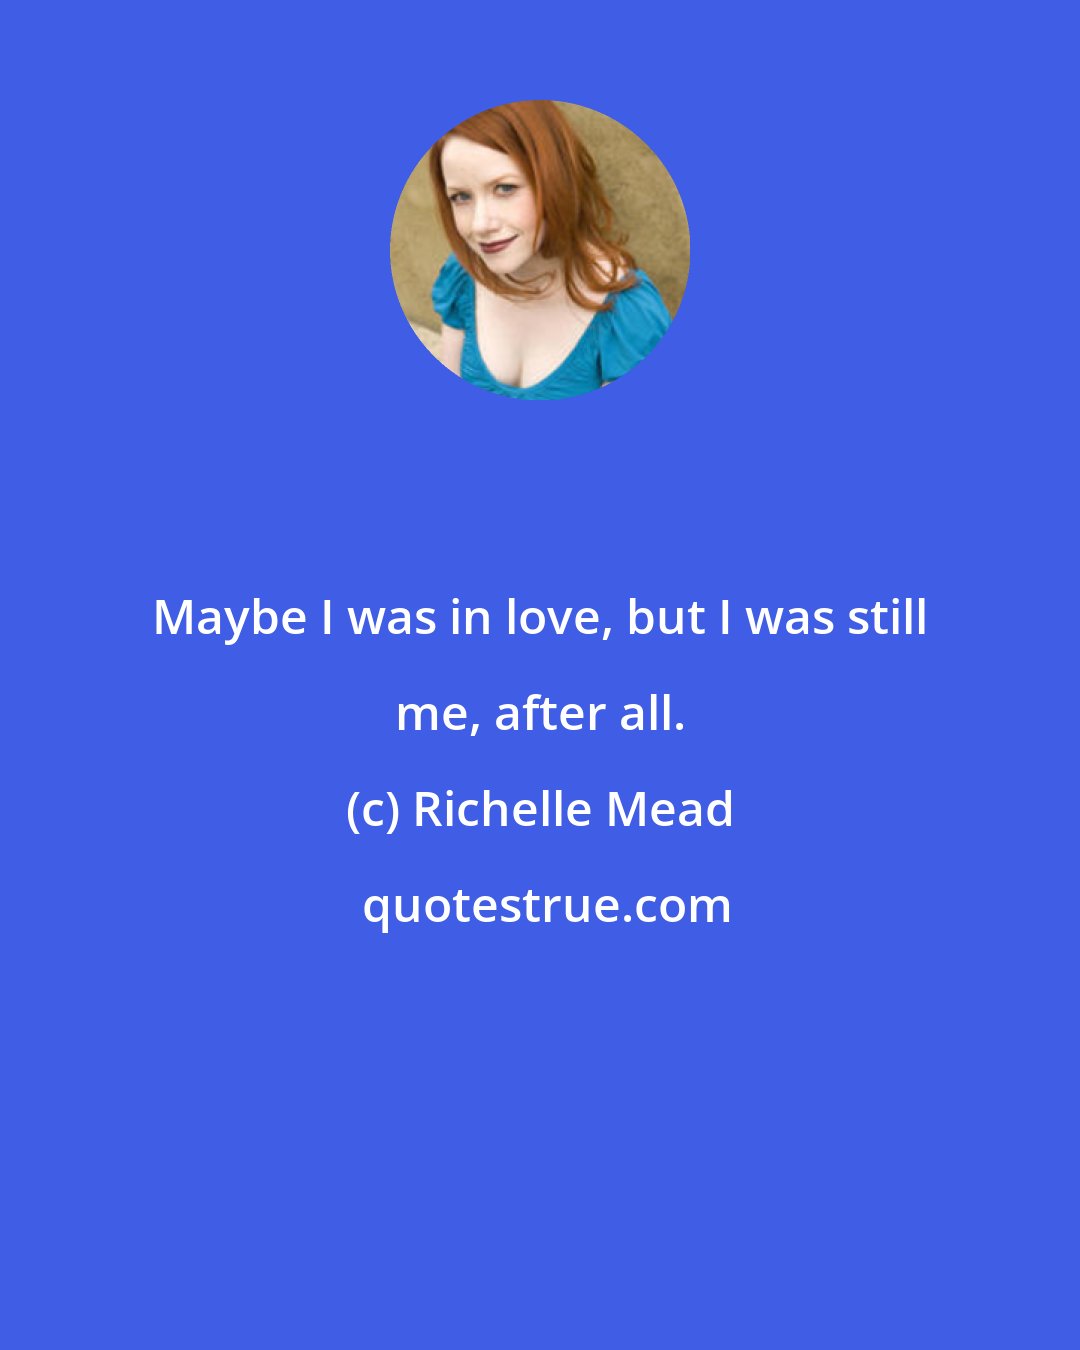 Richelle Mead: Maybe I was in love, but I was still me, after all.